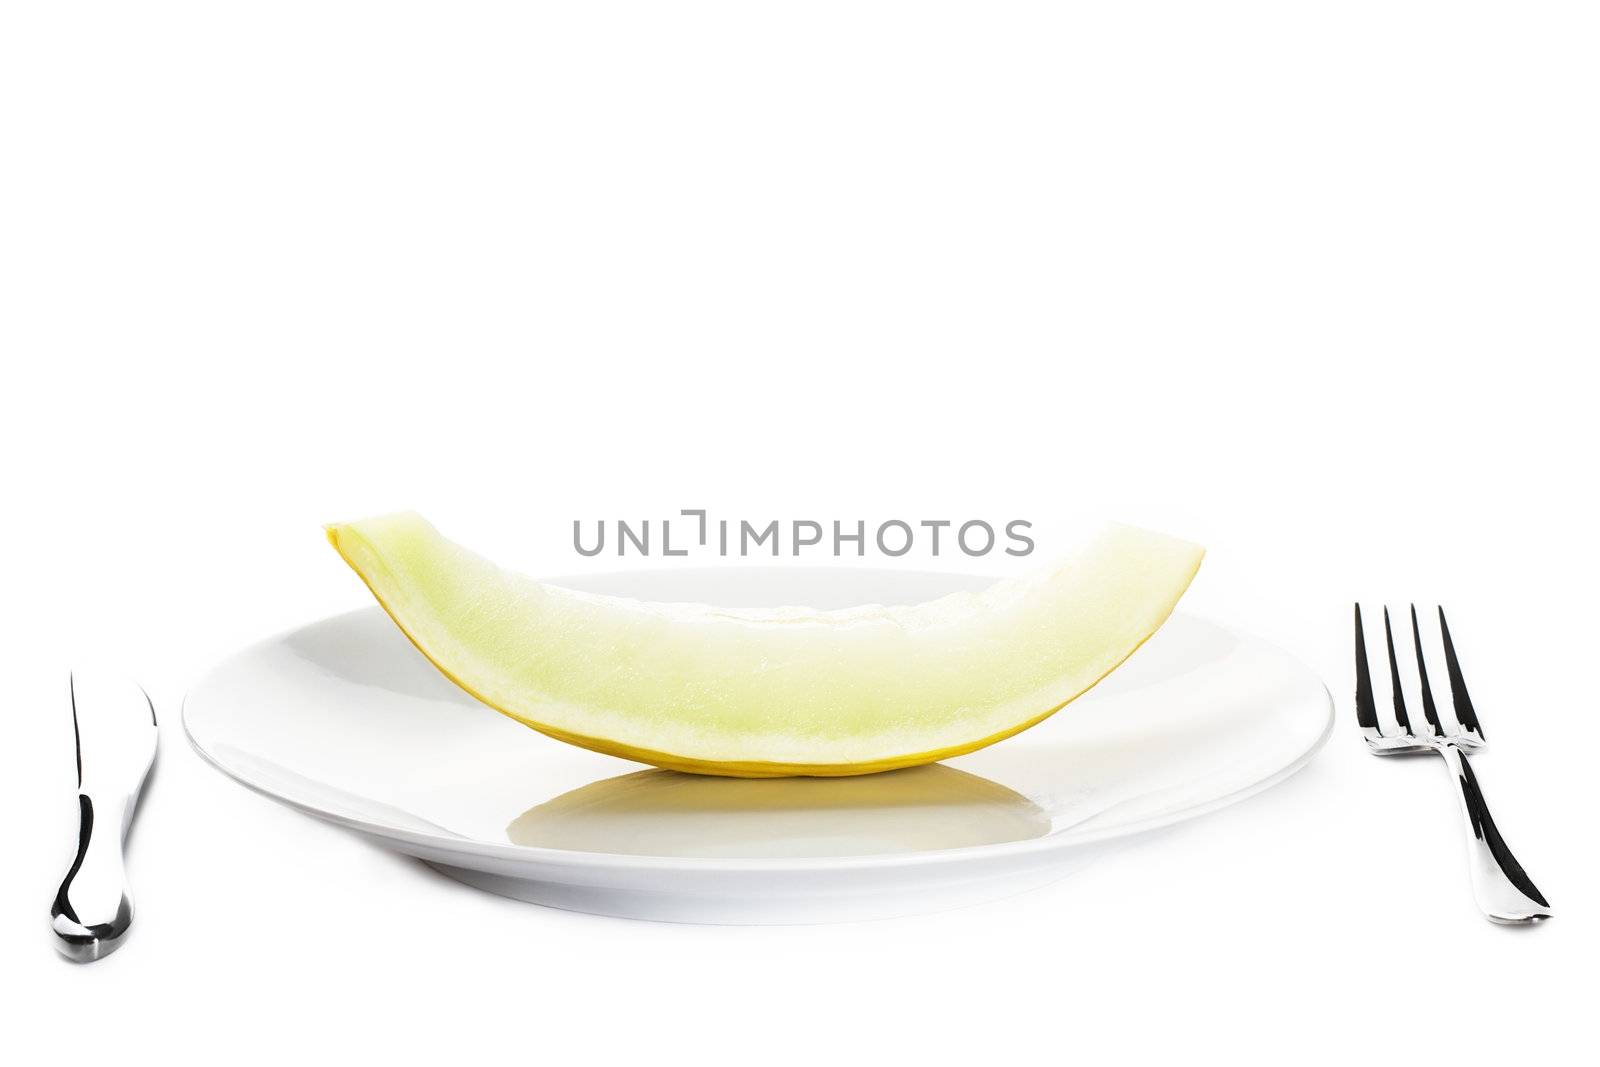 honeydew melon on a plate on white background